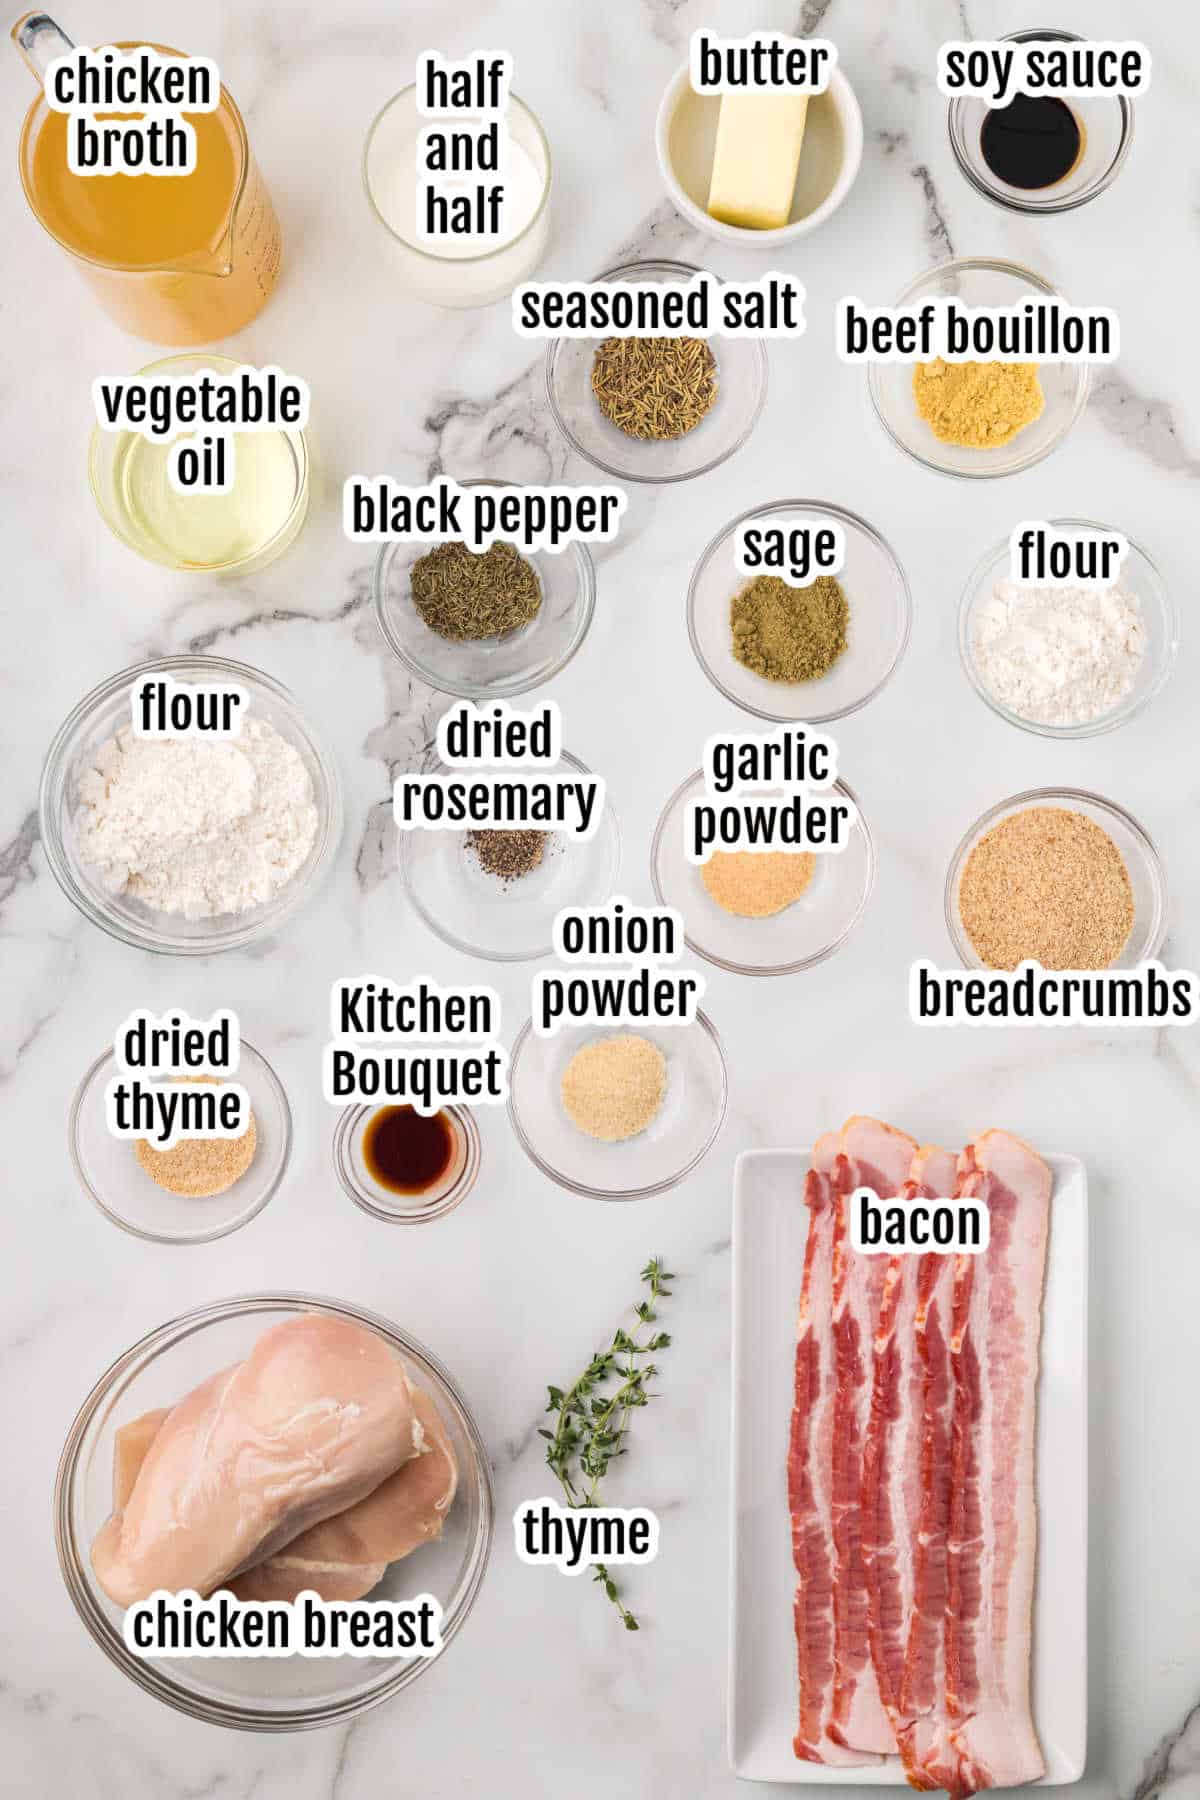 Image of the ingredients needed to make the Southern Smothered Chicken recipe. 